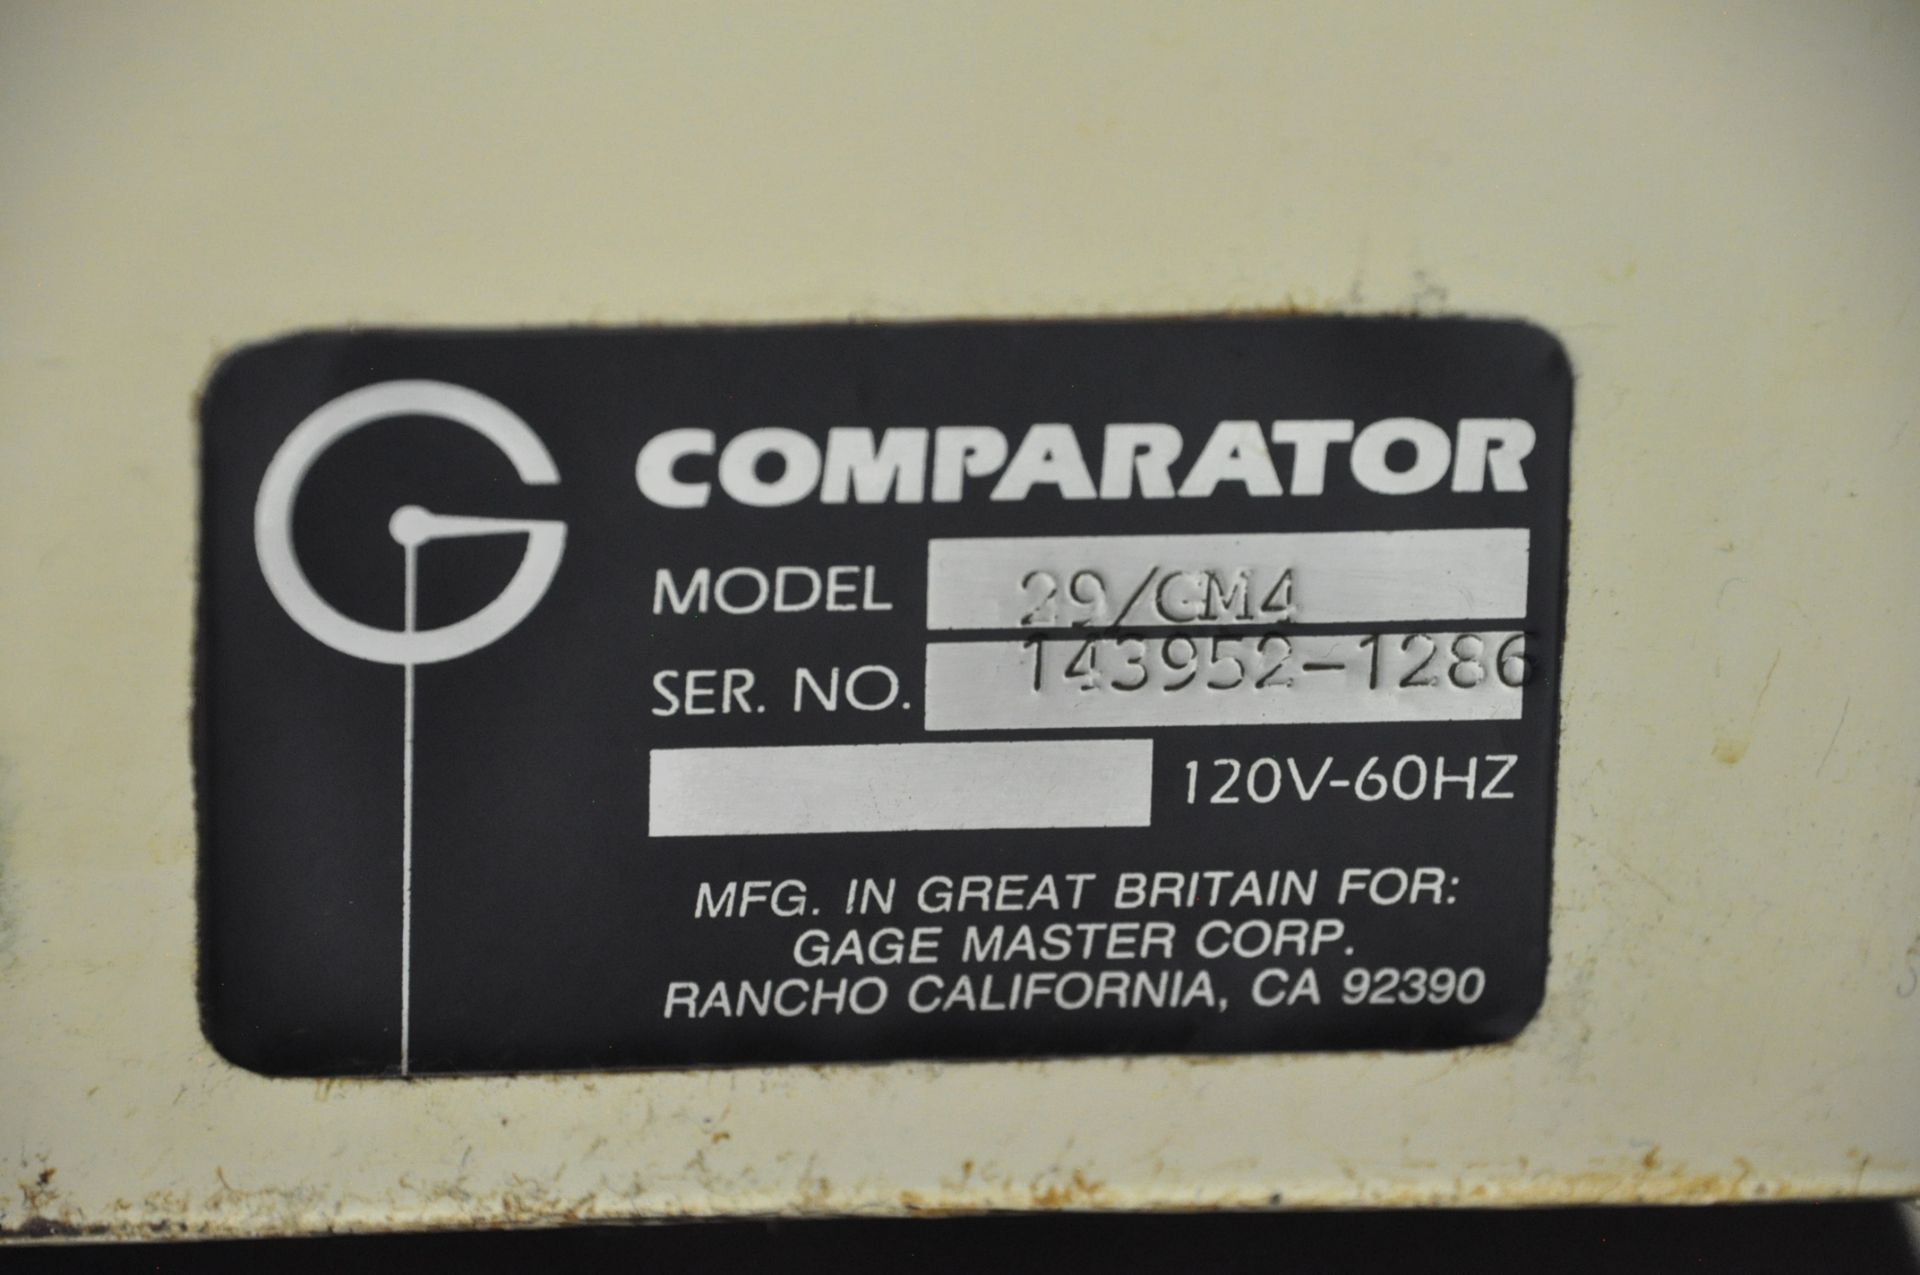 Gage Master Series 20, Model 29GM4, 14" Optical Comparator, S/n 143952-1286, Cabinet Base - Image 4 of 4